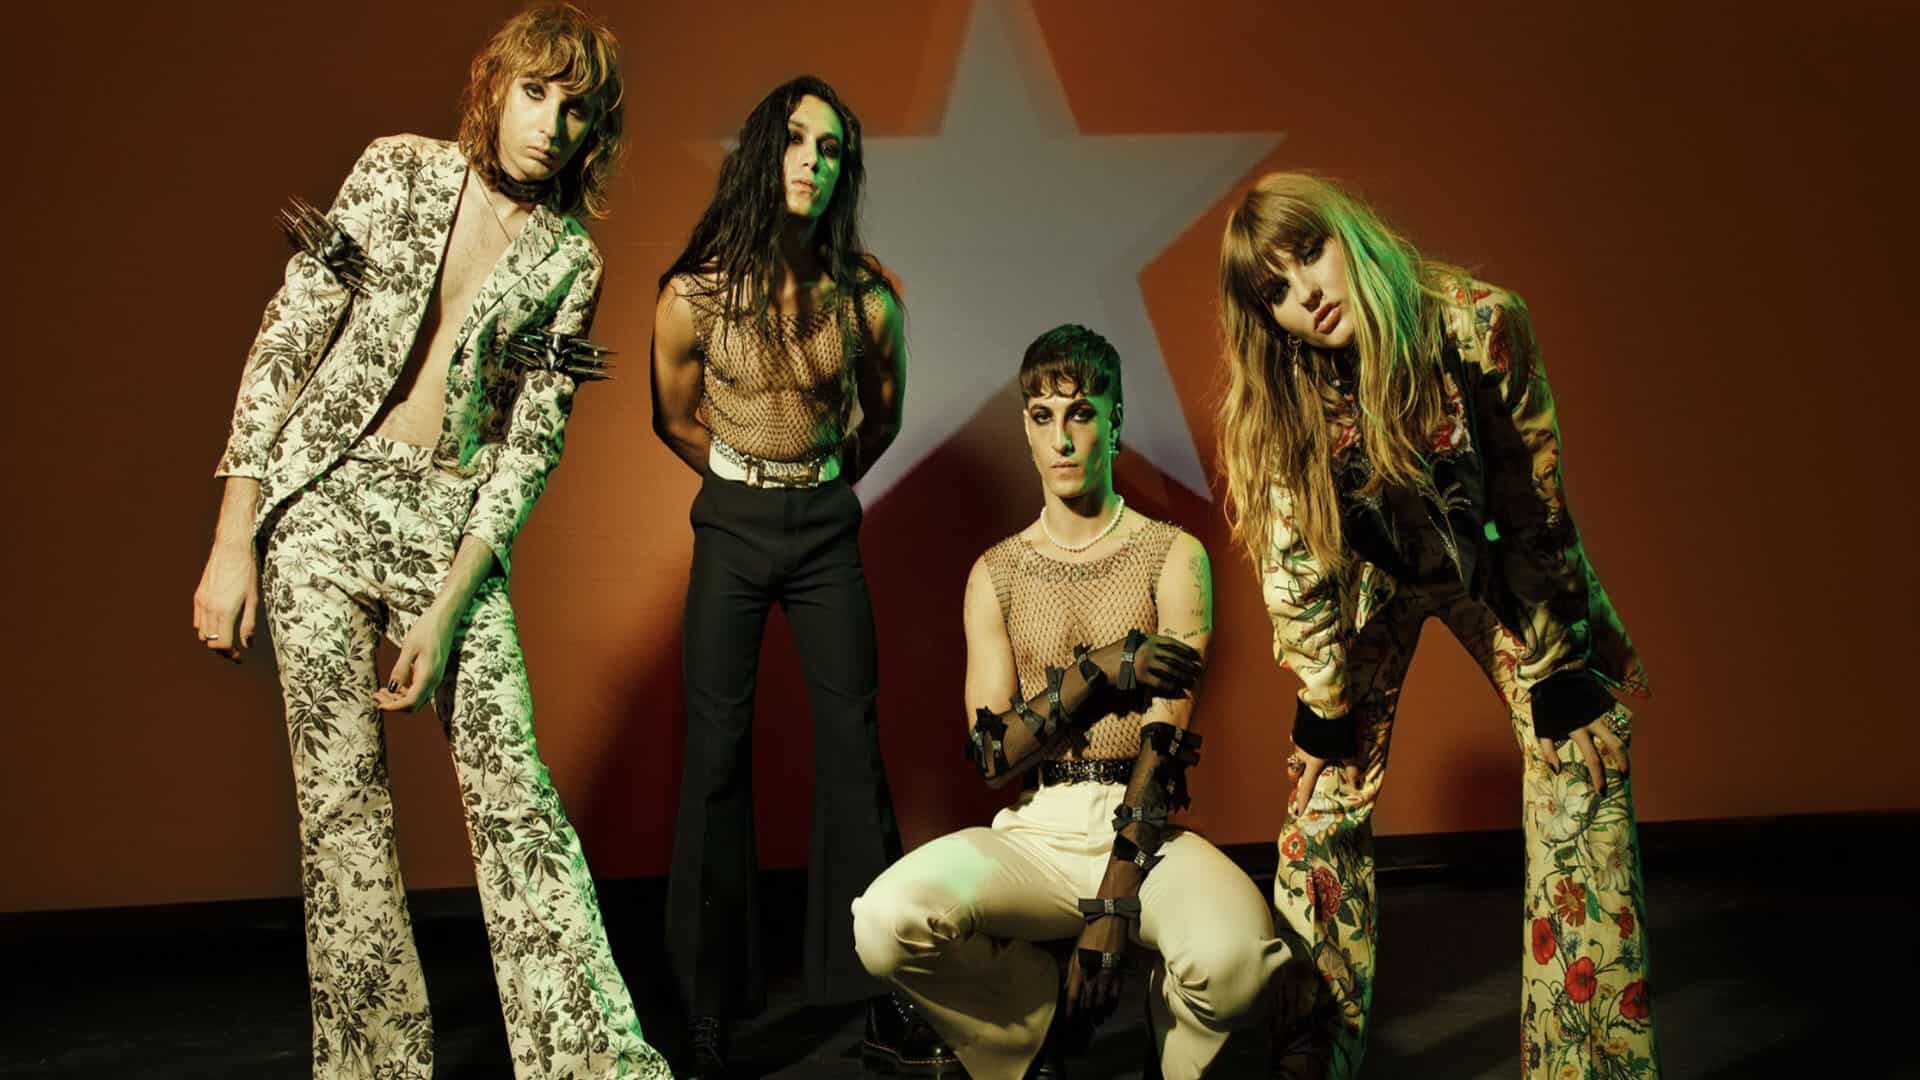 Maneskin: I Wanna Be Your Slave was the band's first song to reach the top 5 of the UK Singles Chart. 1920x1080 Full HD Background.